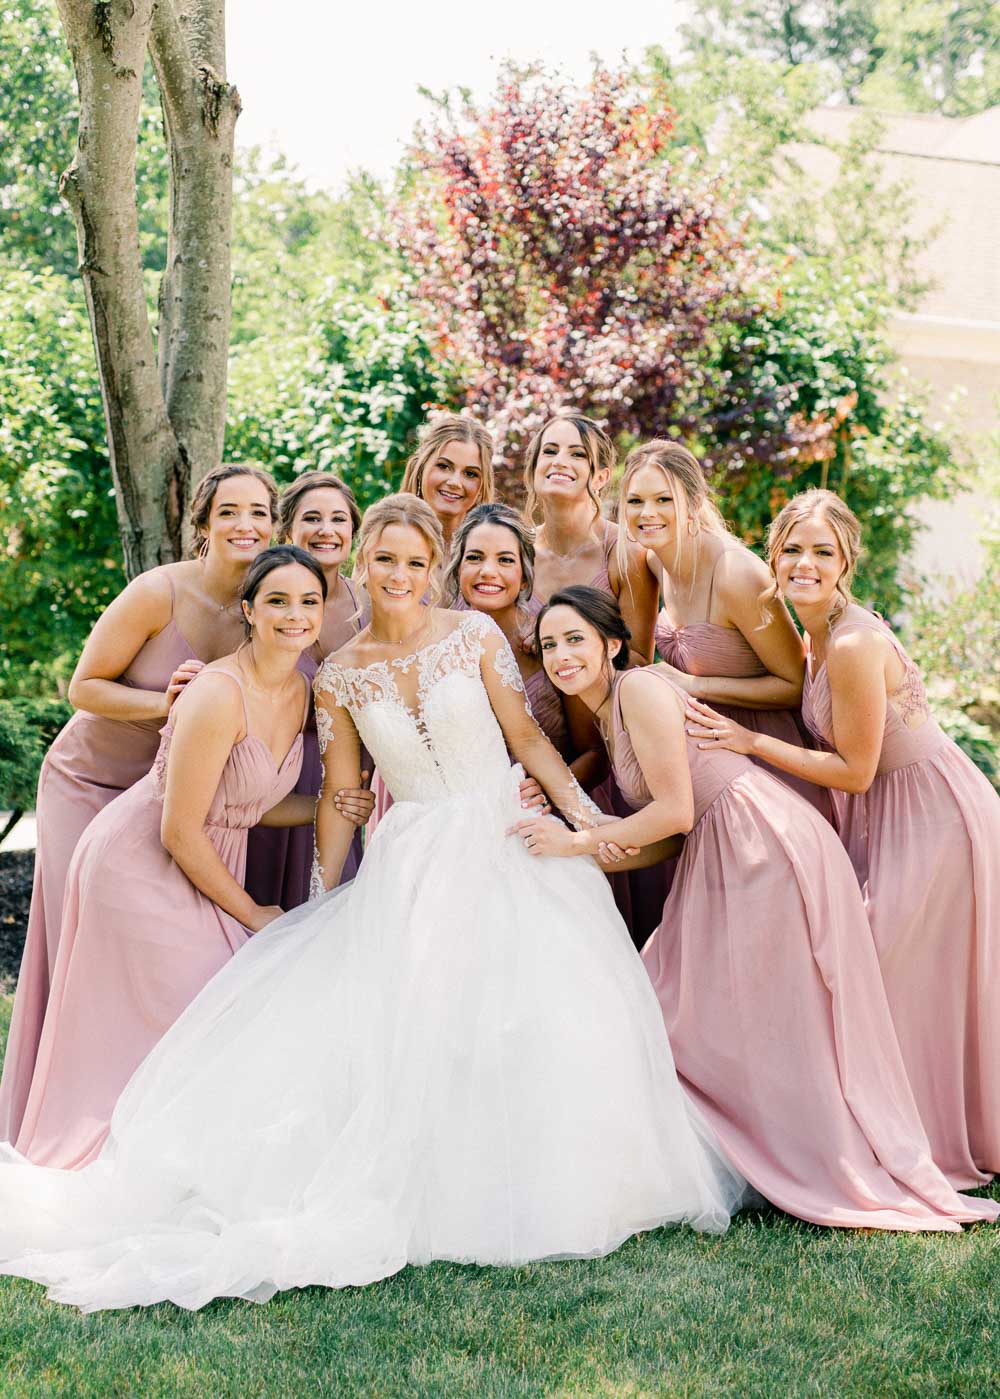 Bride getting ready with her bridesmaids photographed by Juliana Kaderbek Photography, Cleveland wedding photographer